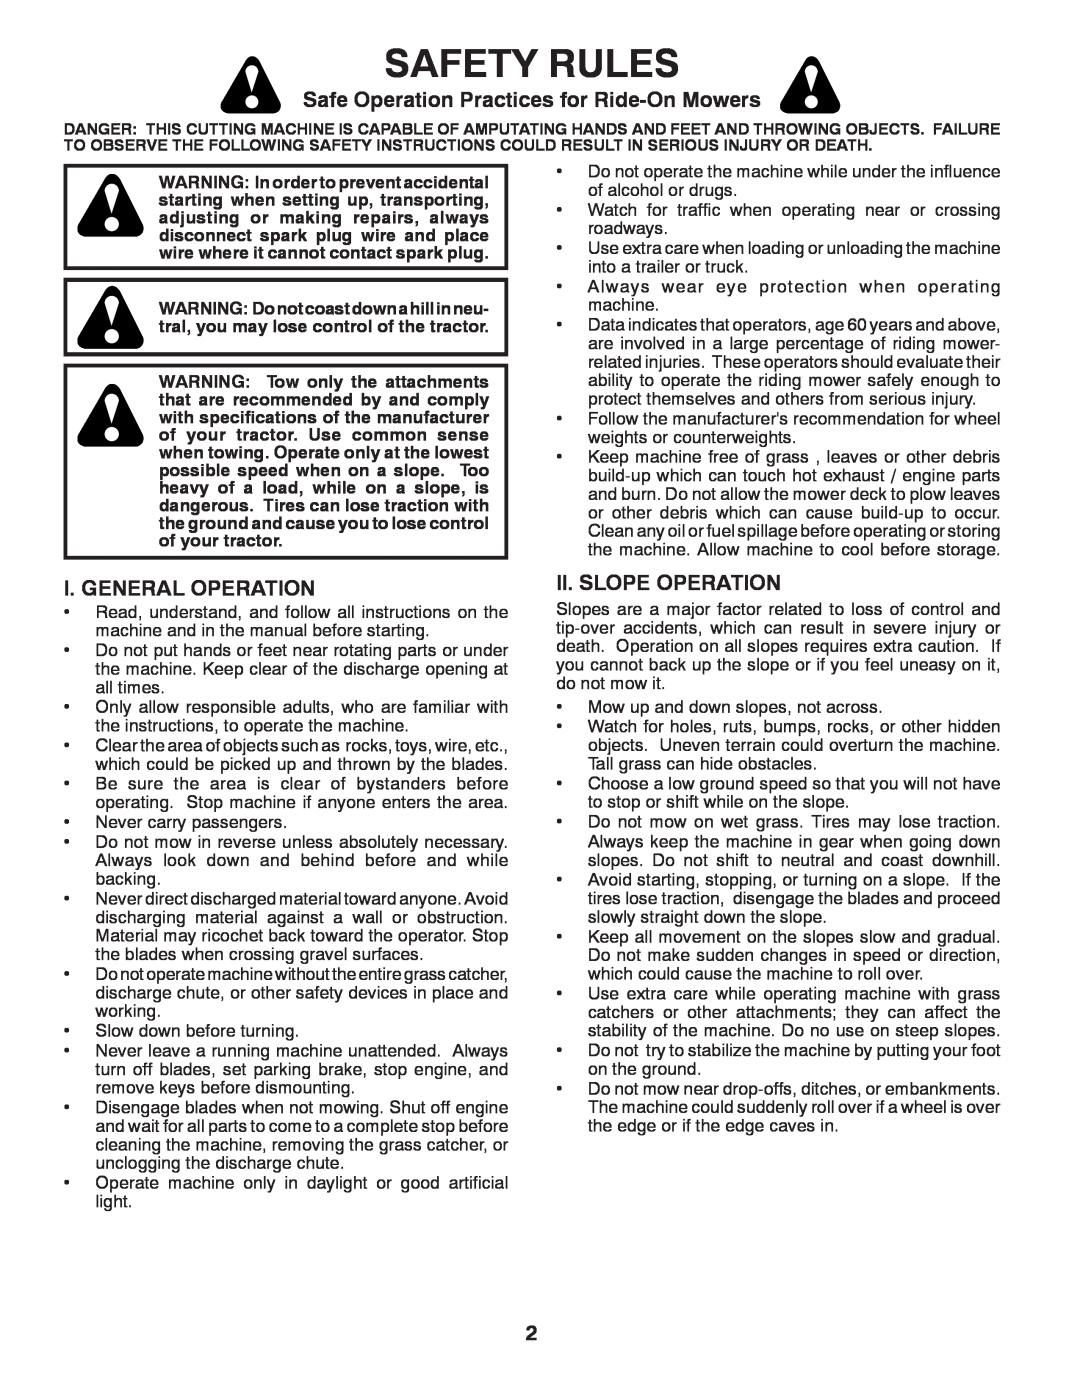 Poulan 420408 manual Safety Rules, Safe Operation Practices for Ride-On Mowers, I. General Operation, Ii. Slope Operation 